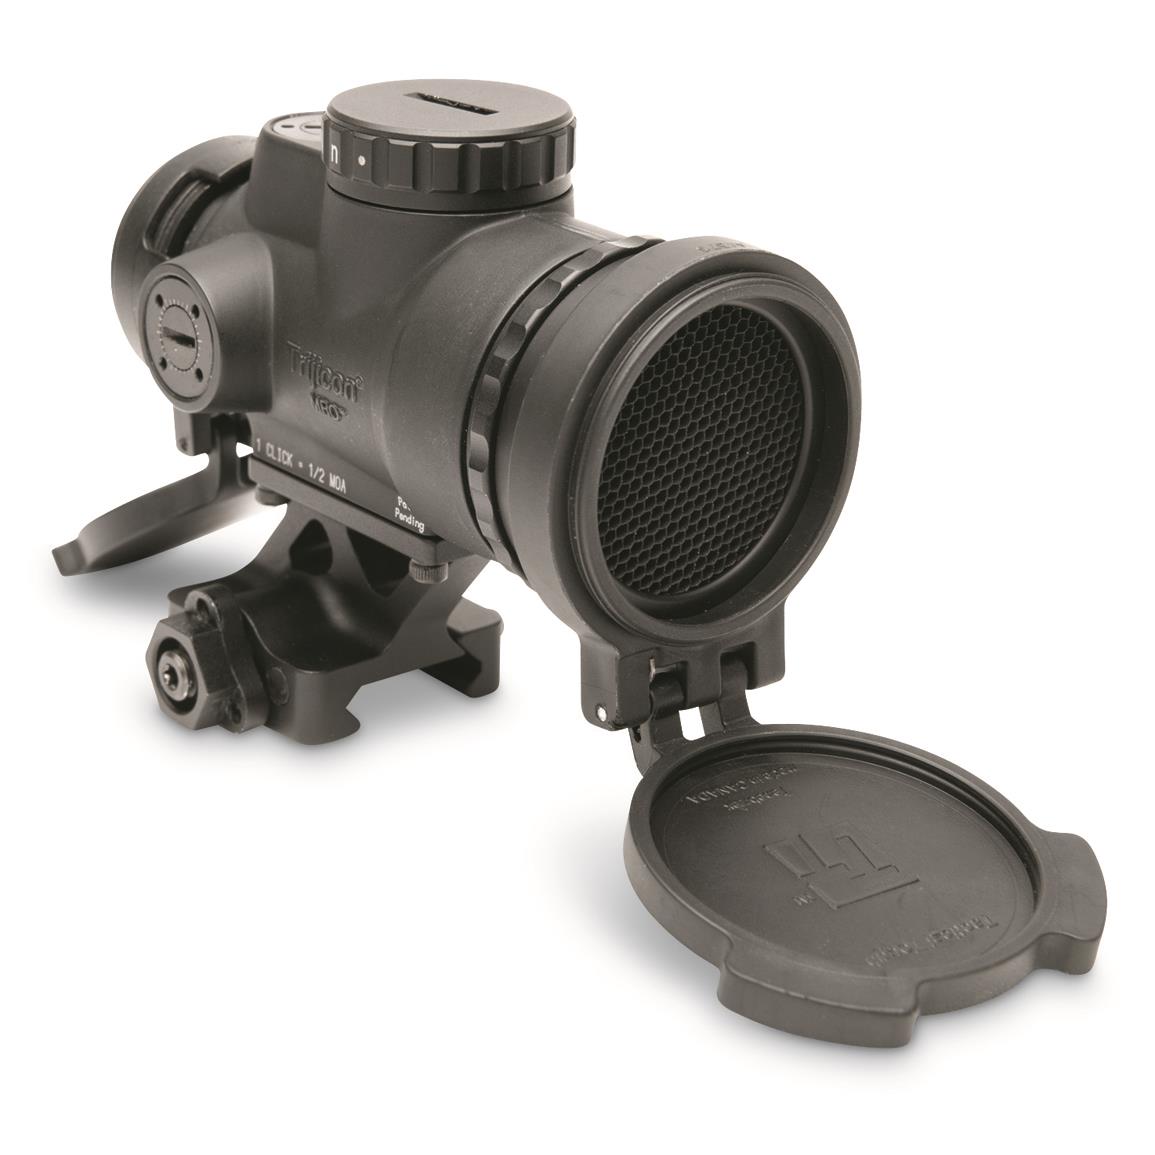 Trijicon MRO Patrol, 1x25mm, 2.0 MOA Adjustable Red Dot with Full Co-Witness Sight